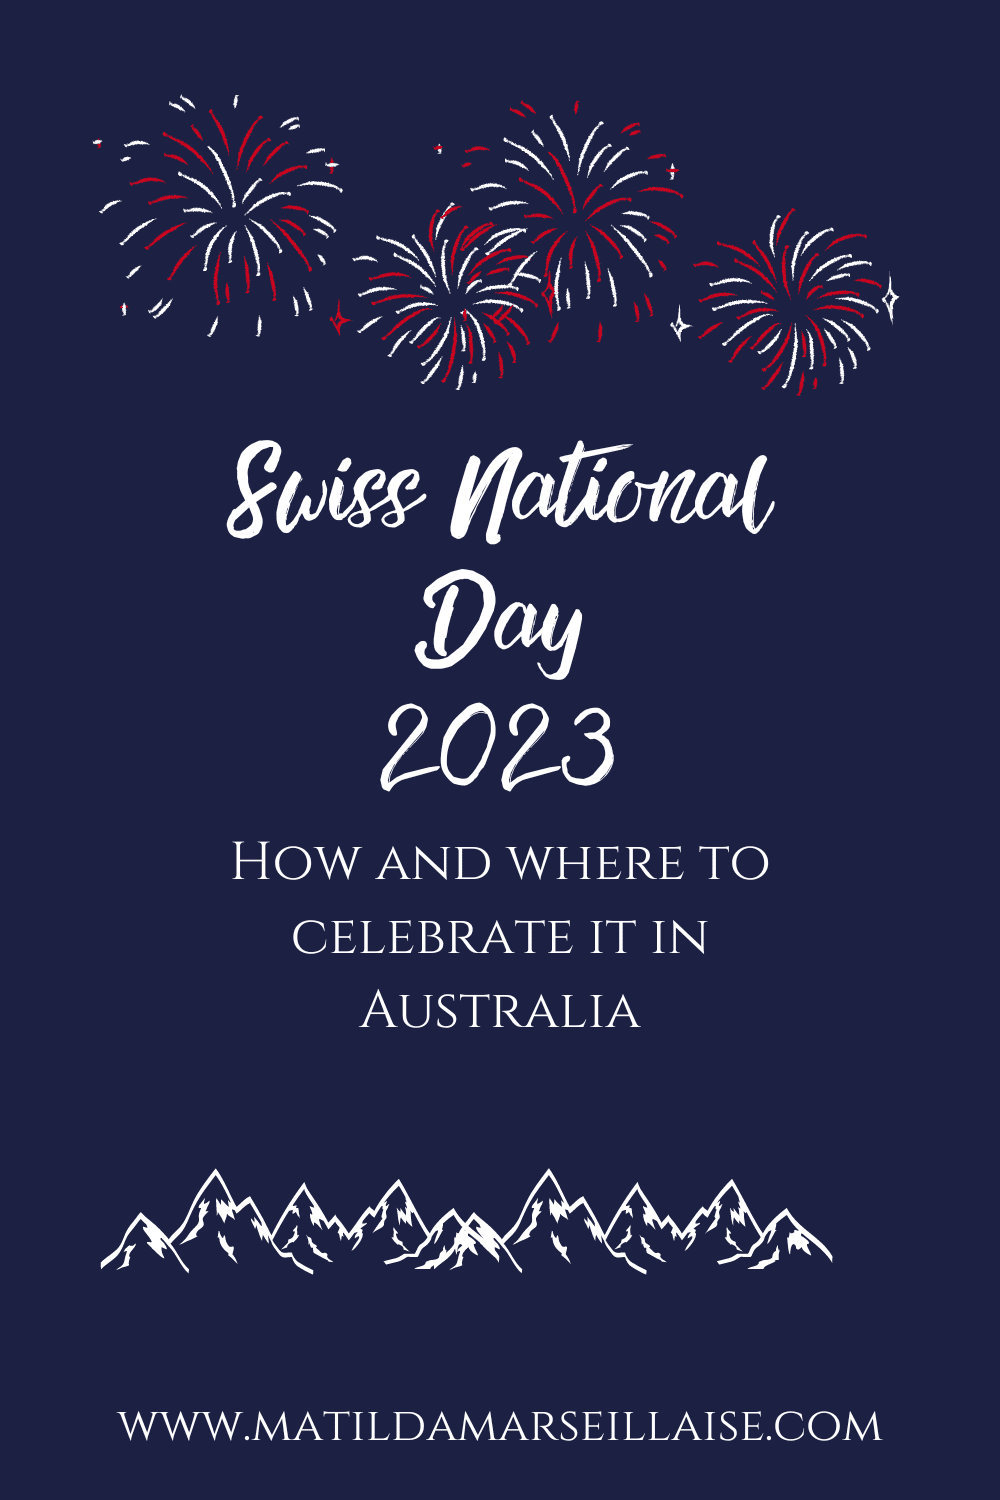 Swiss National Day 2023: how and where to celebrate it in Australia